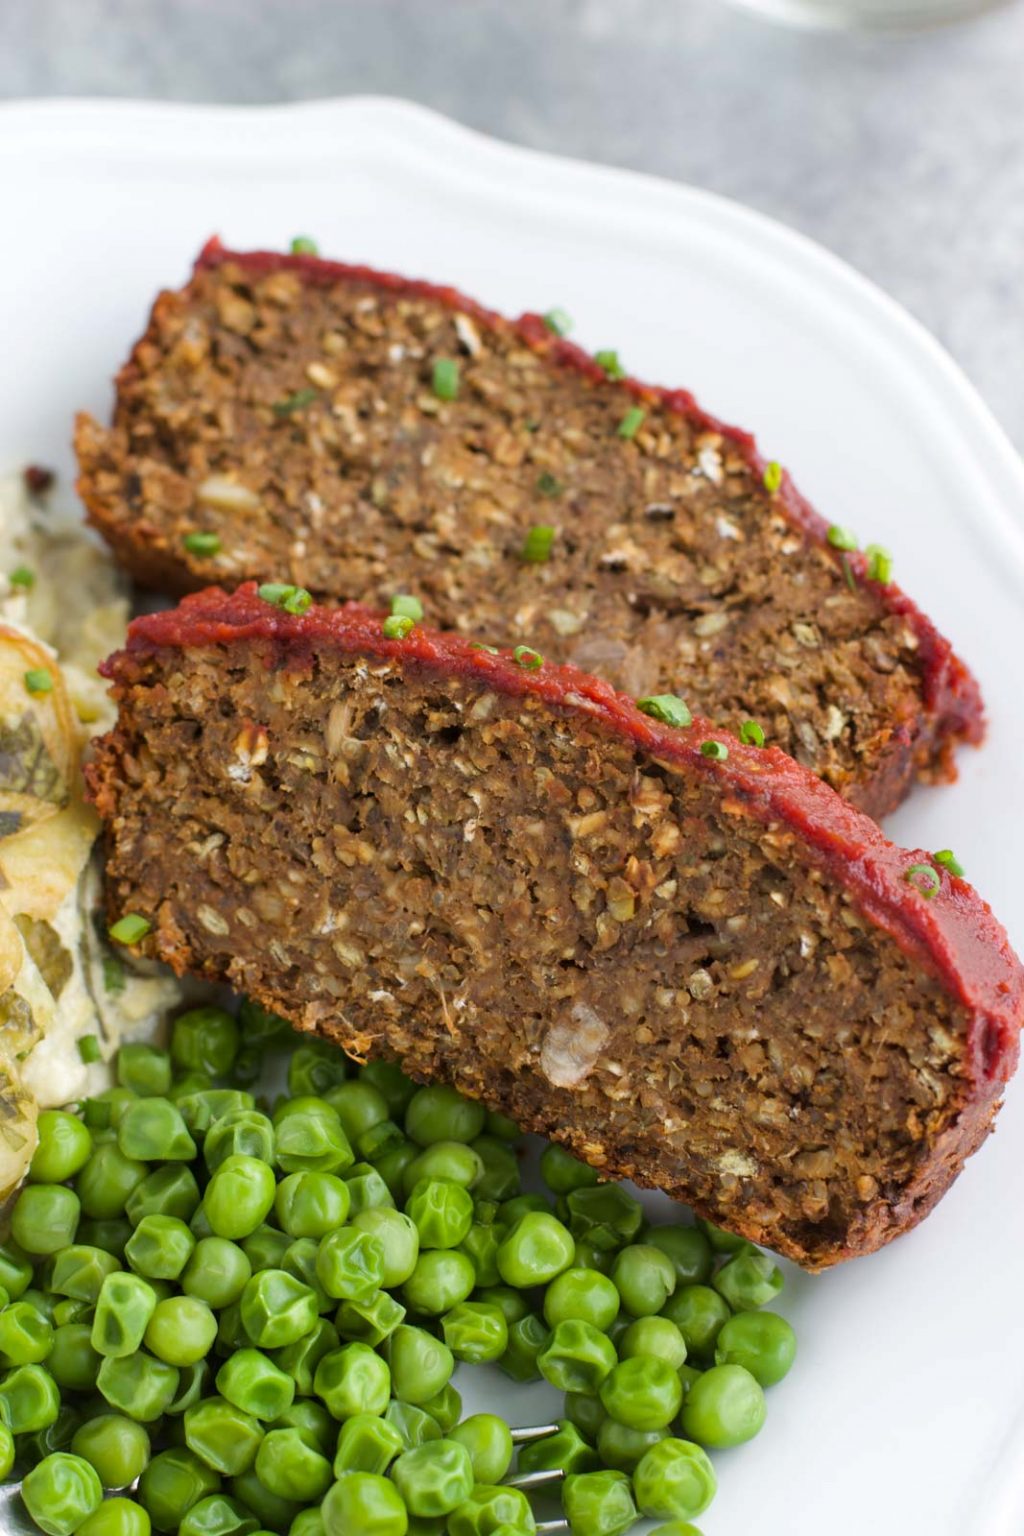 Two slices of vegan meatloaf next to potatoes and green peas on a white plate.